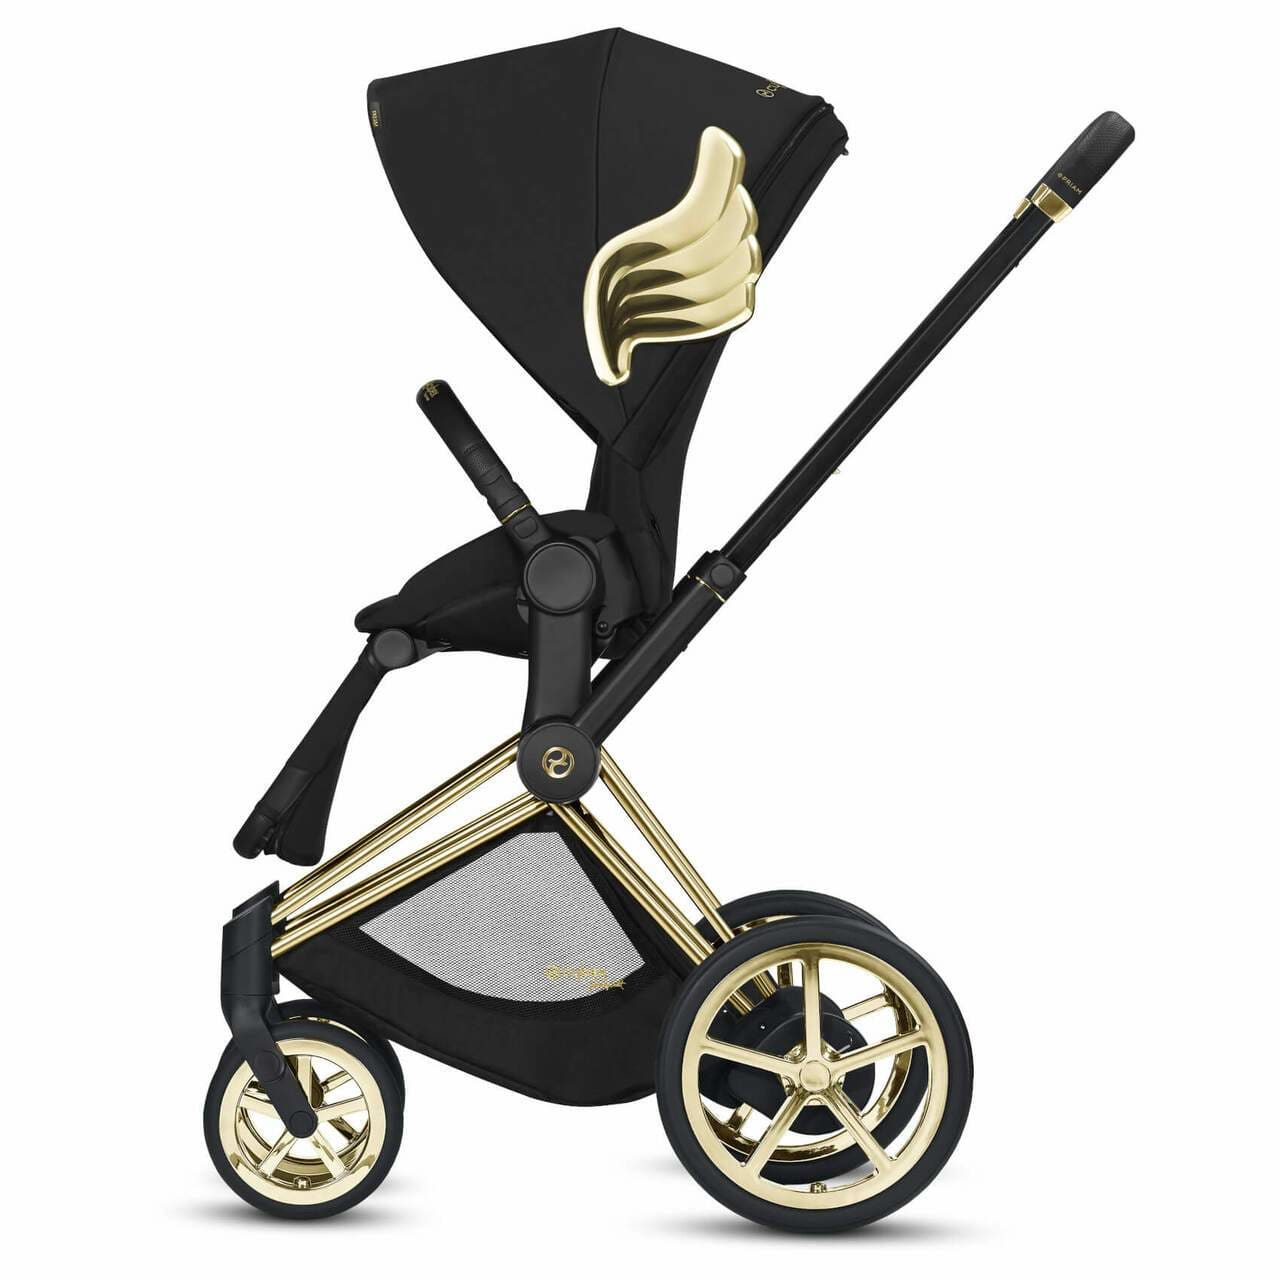 CYBEX Jeremy Scott Wing Collection Priam 3-in-1 Travel System Baby Stroller - Black 519003629 4058511709123